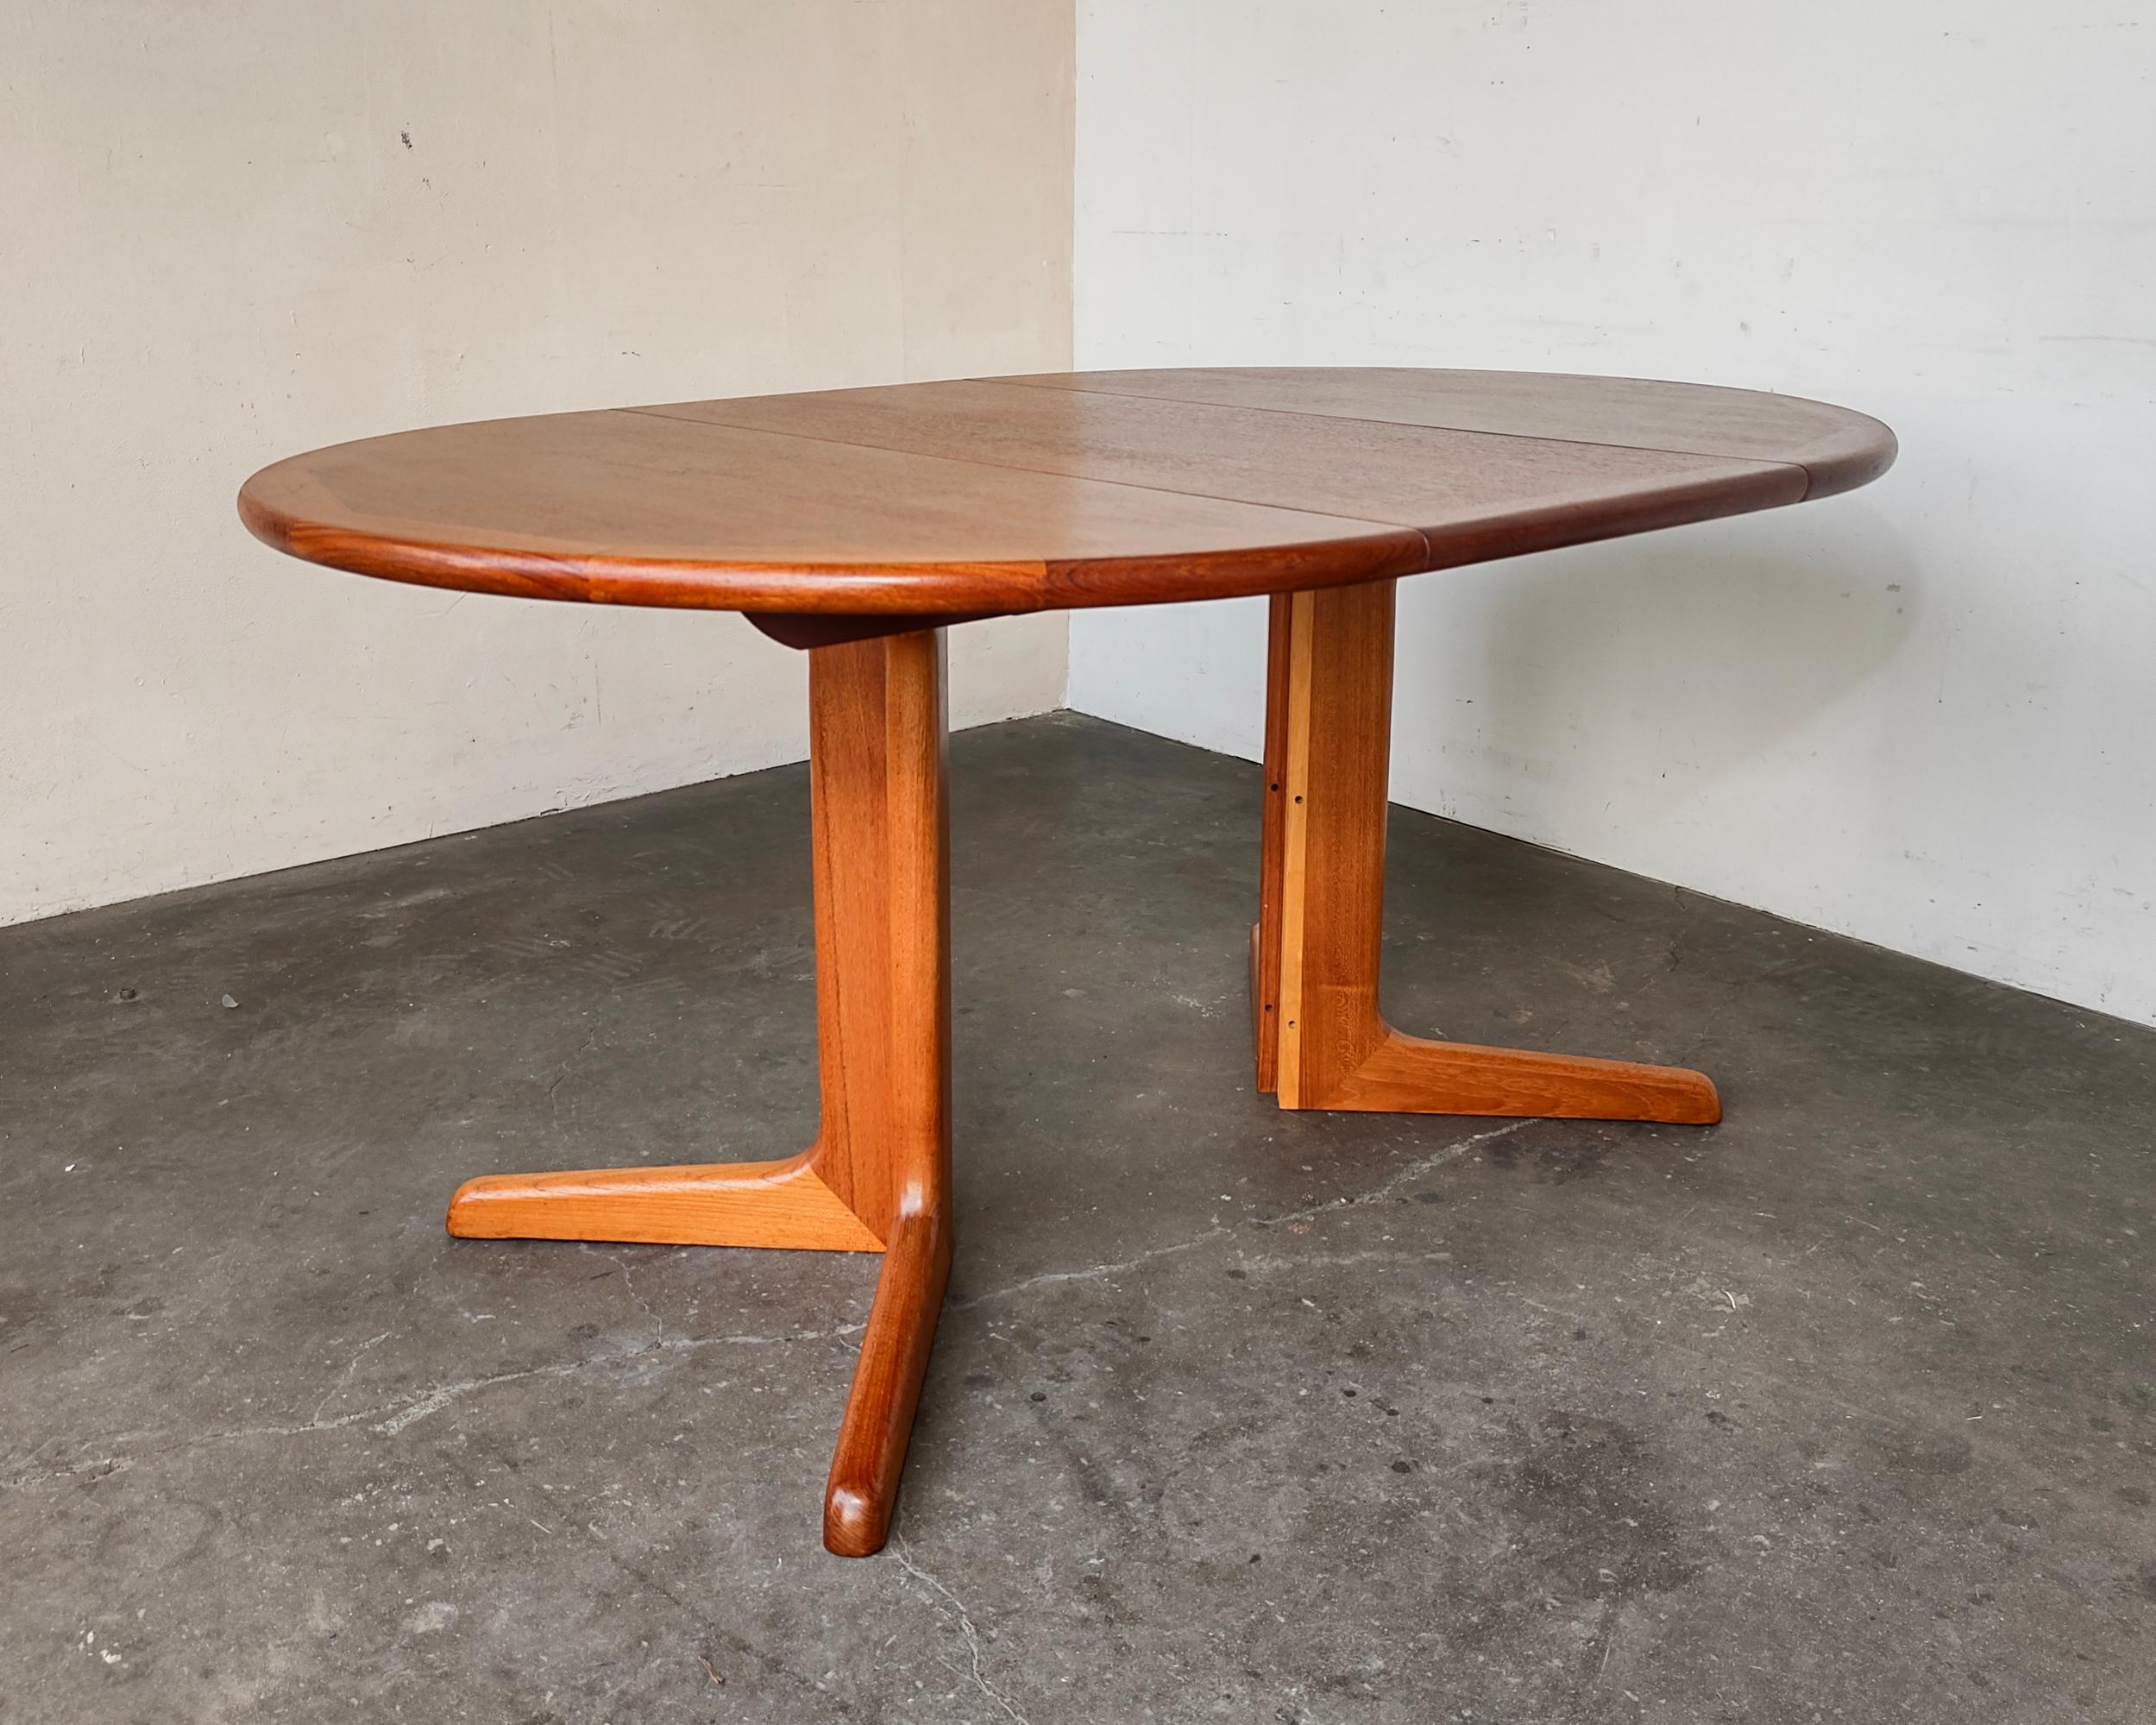 Mid-Century Modern teak extendable dining table. Classic Scandinavian design with rounded edge detail and joinery. Professionally restored with durable oil-based finish to showcase beautiful wood grain. Expands from round to racetrack shape. Overall